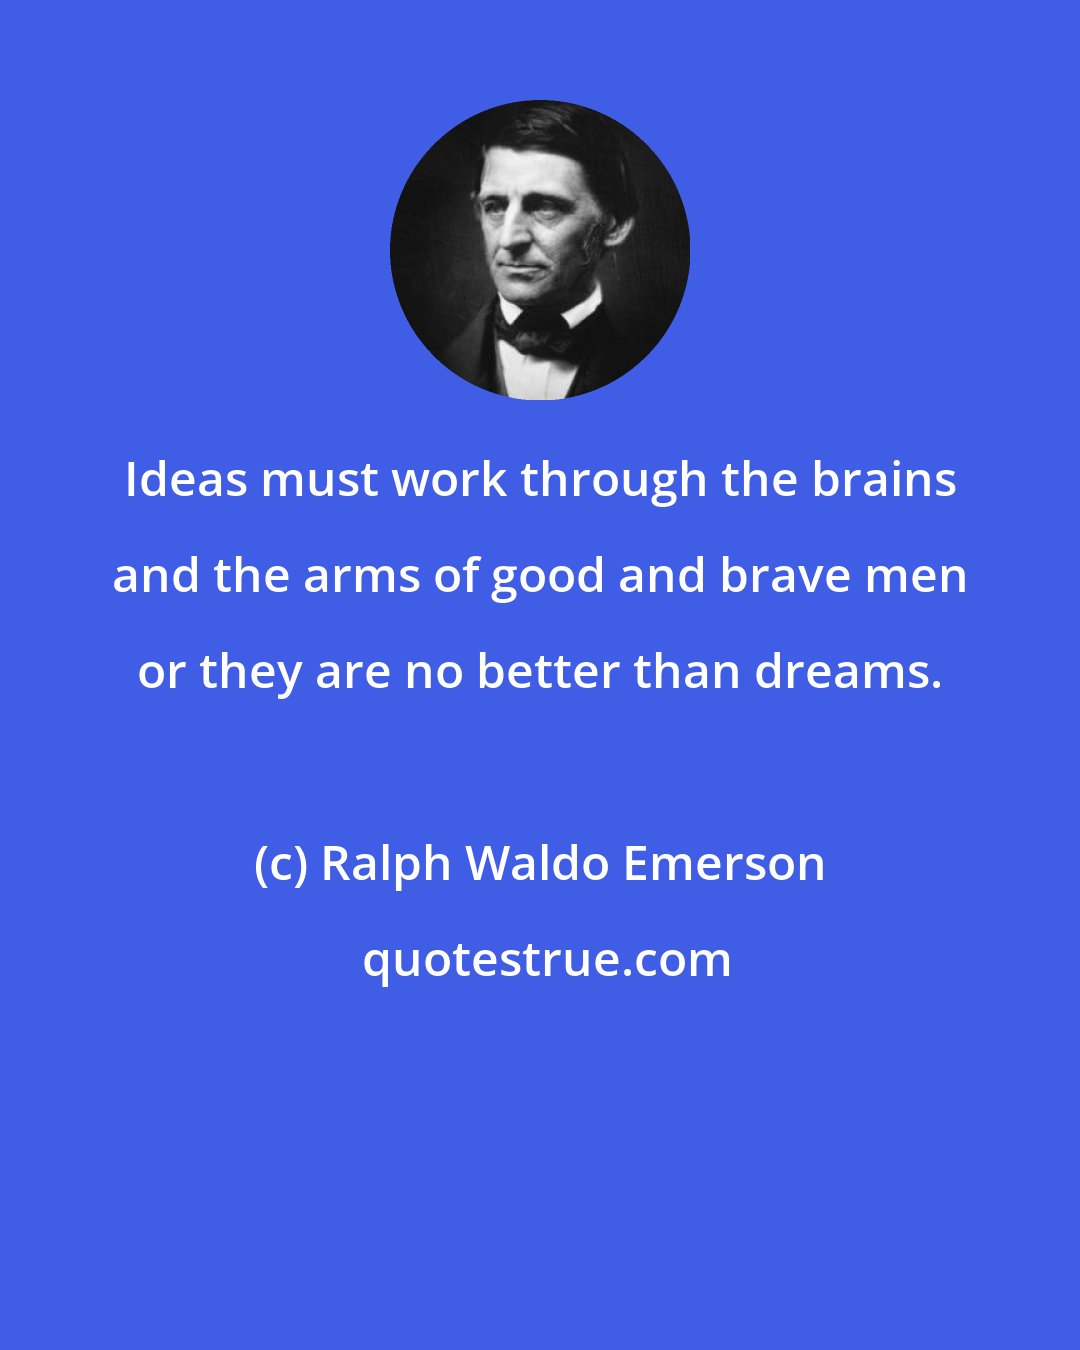 Ralph Waldo Emerson: Ideas must work through the brains and the arms of good and brave men or they are no better than dreams.